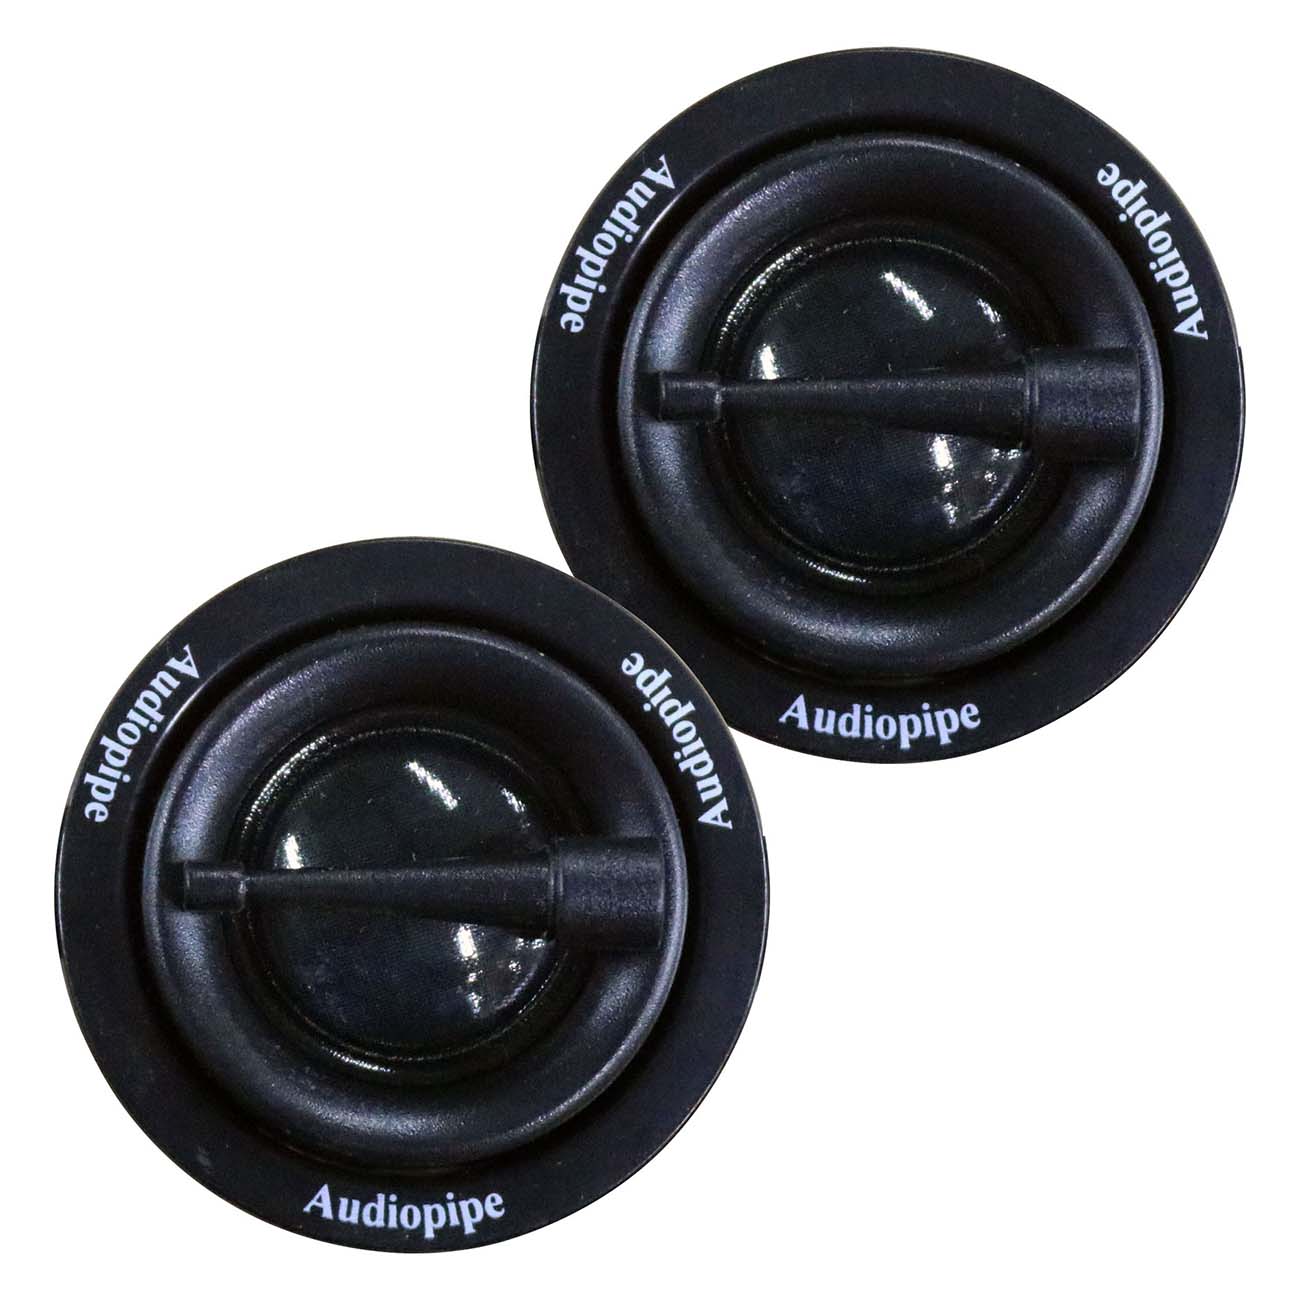 Audiopipe Soft Dome 3/4" Tweeters (sold In Pairs) 100watts Max